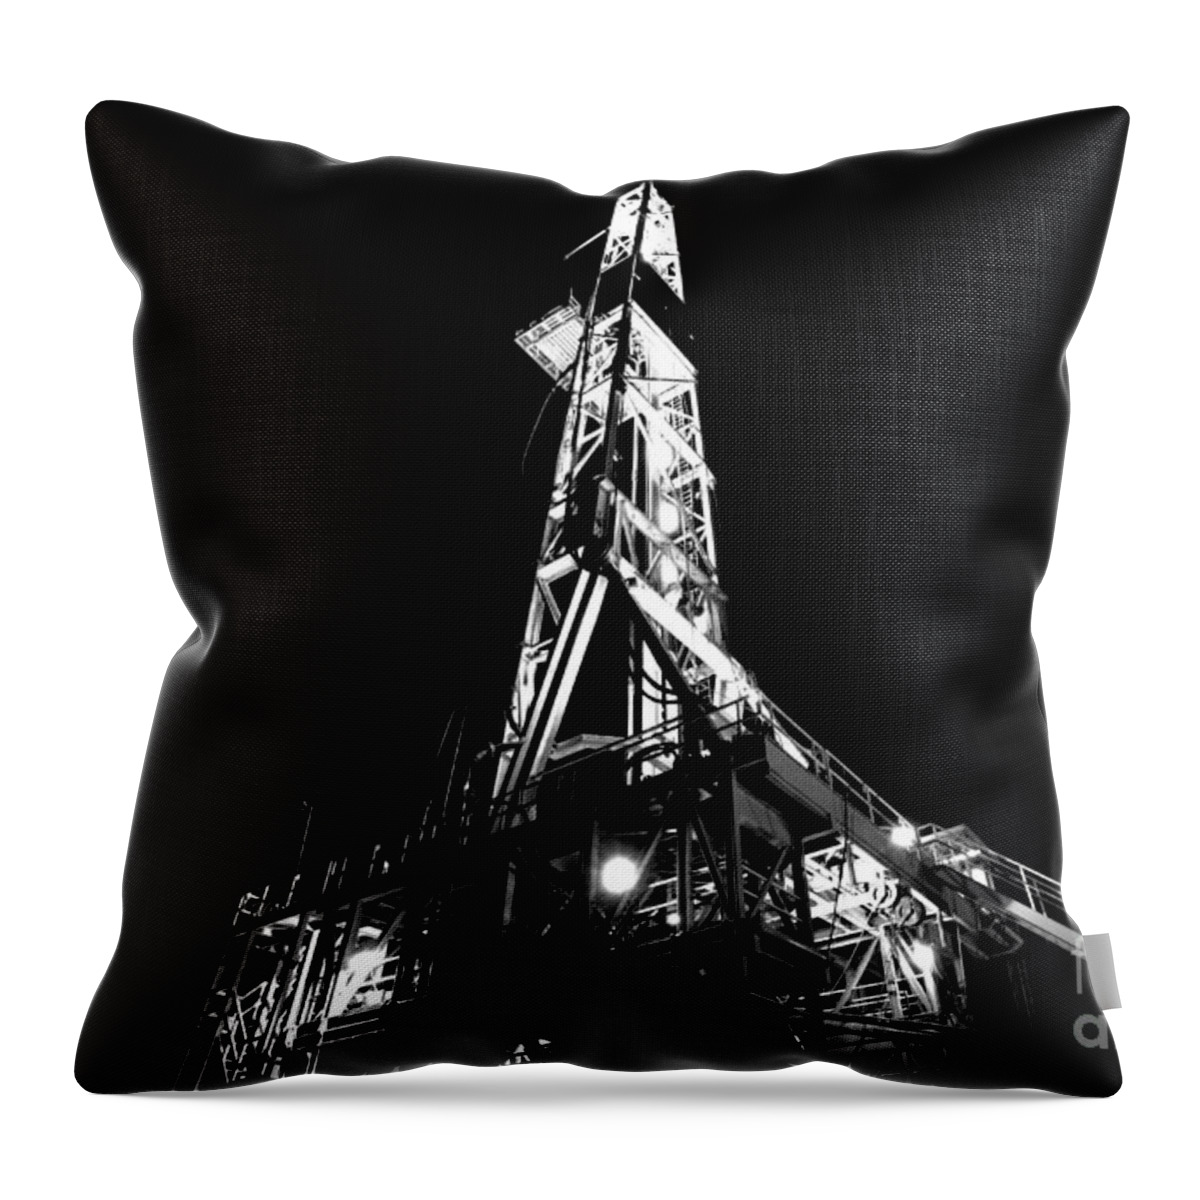 Rig-157 Throw Pillow featuring the photograph Cac001bw-76 by Cooper Ross